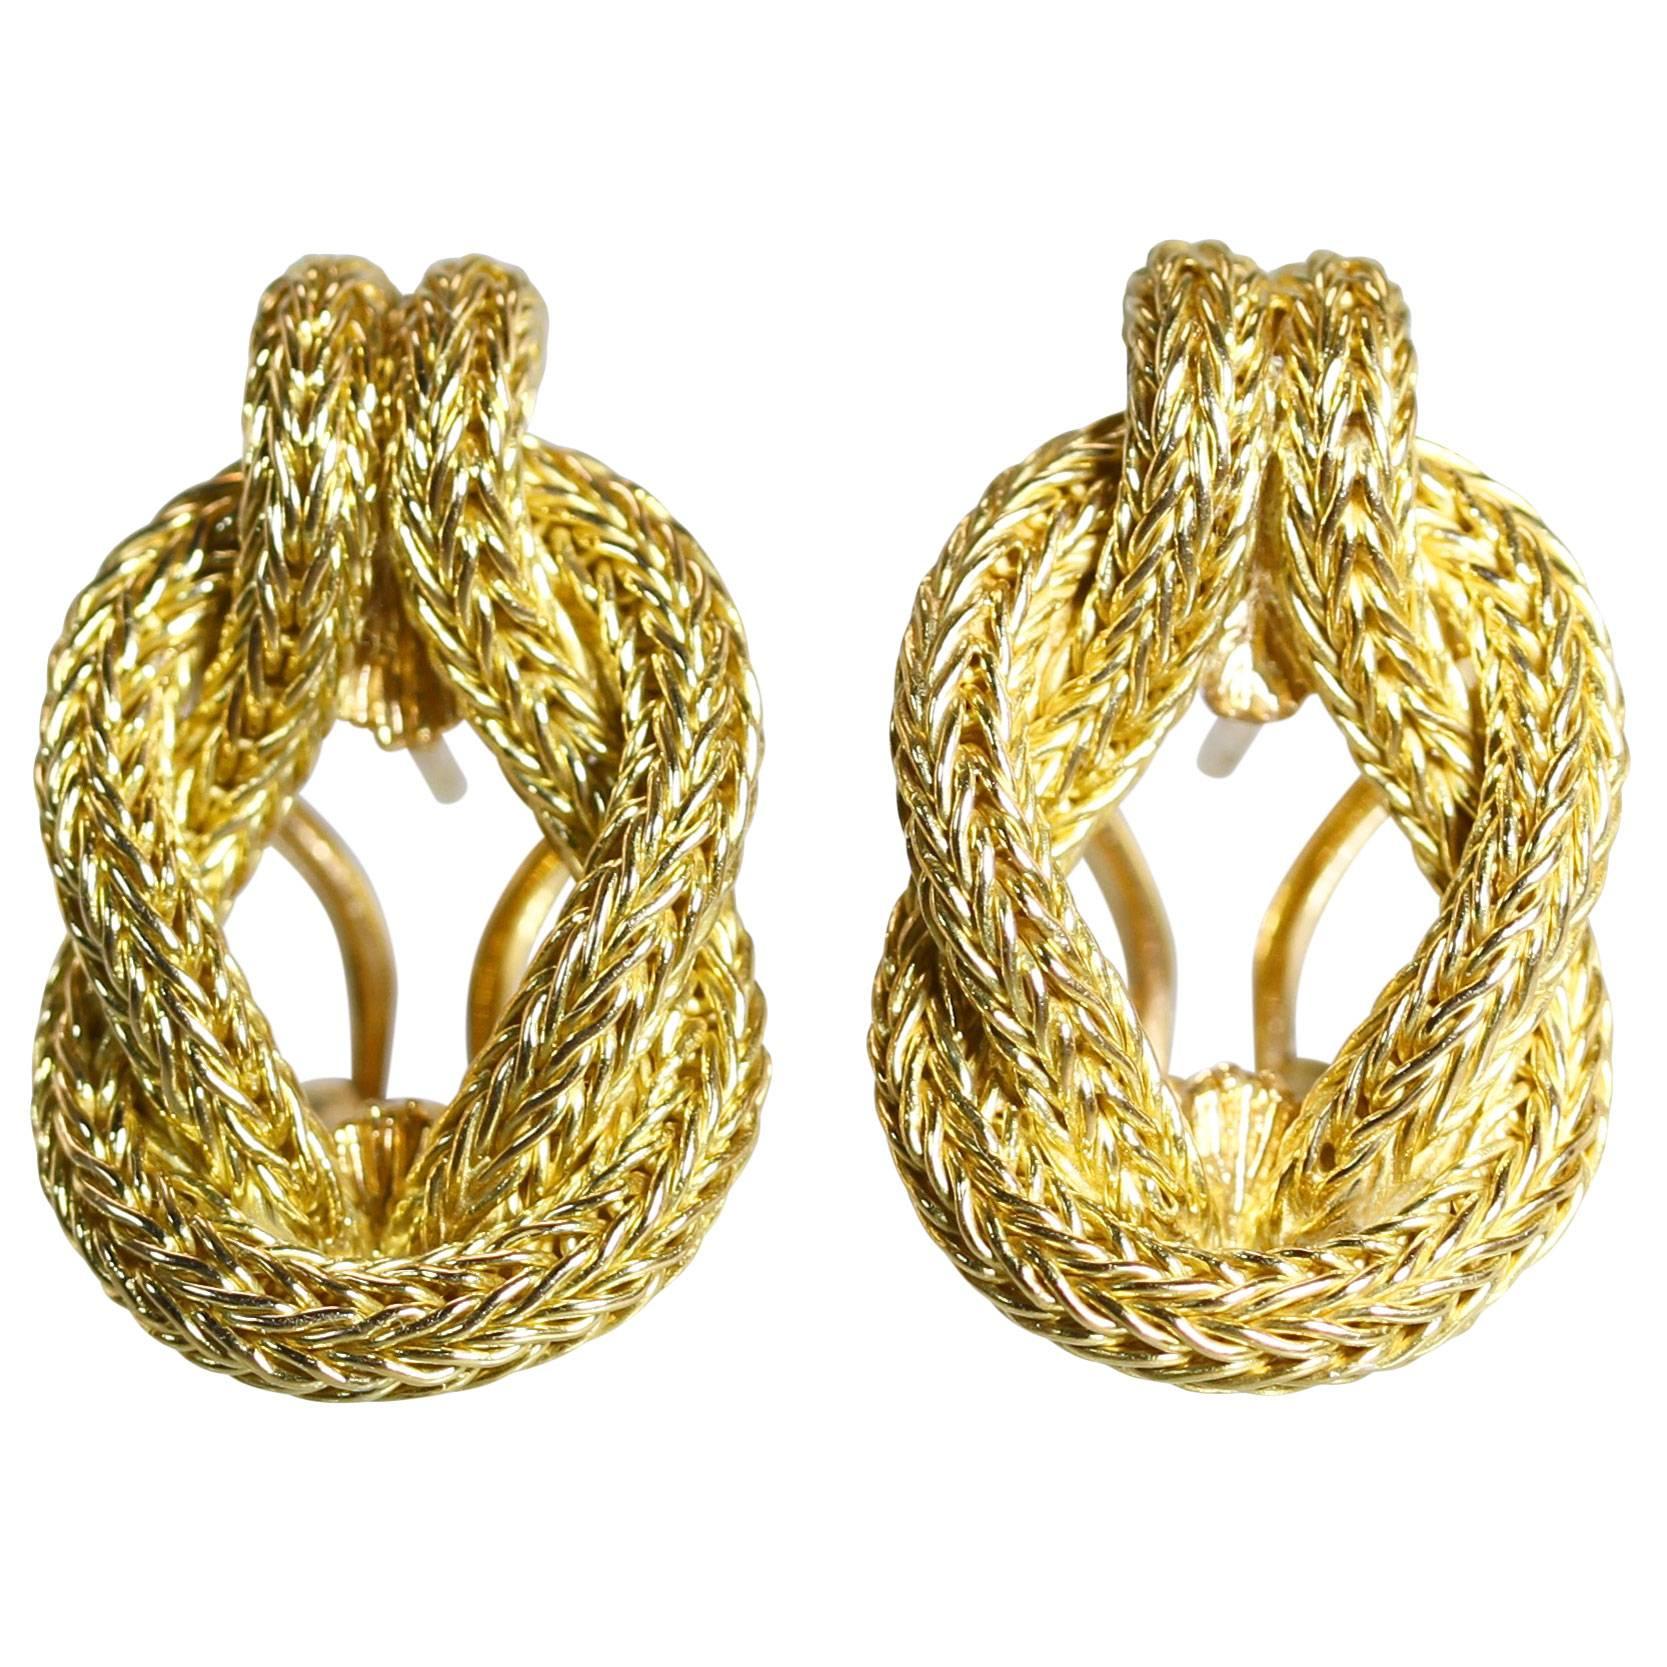 Lalaounis Gold Hercules Knot Earclips